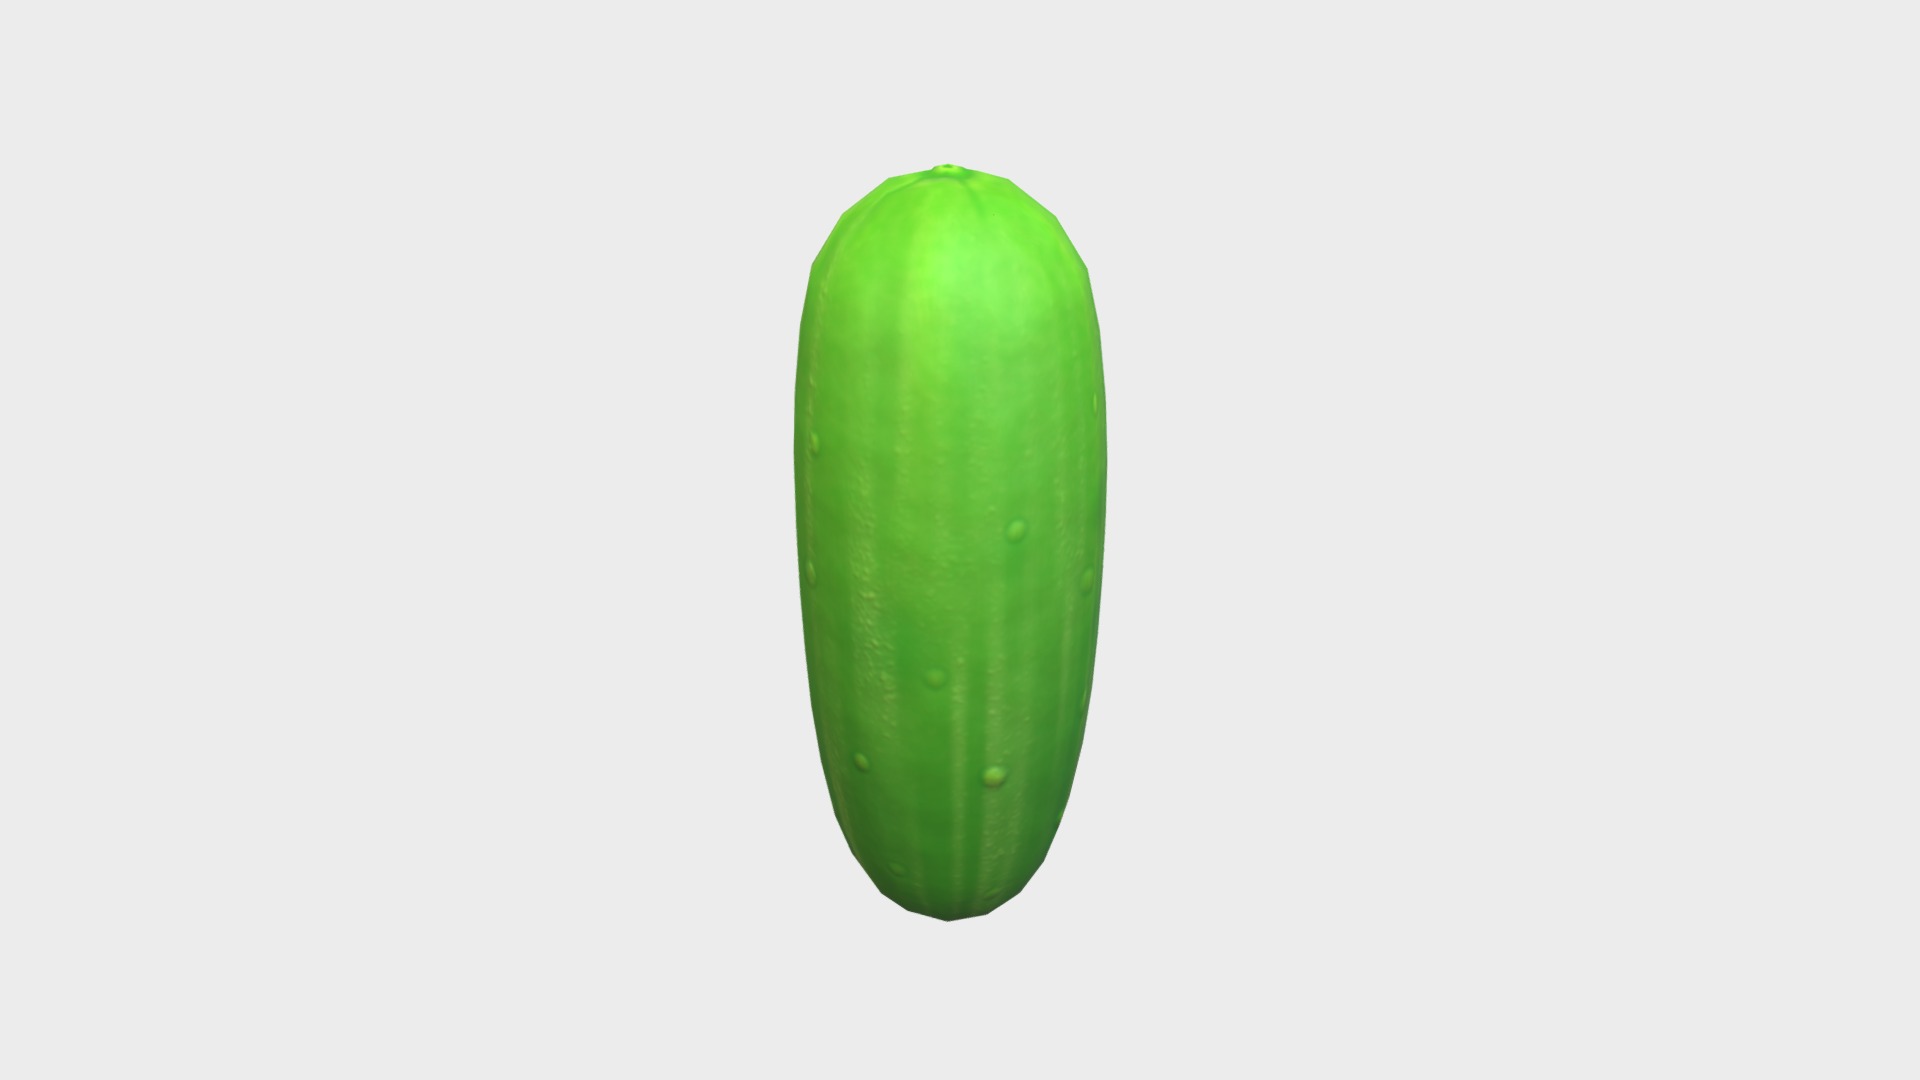 3D model Cucumber - This is a 3D model of the Cucumber. The 3D model is about a cucumber with a white background.